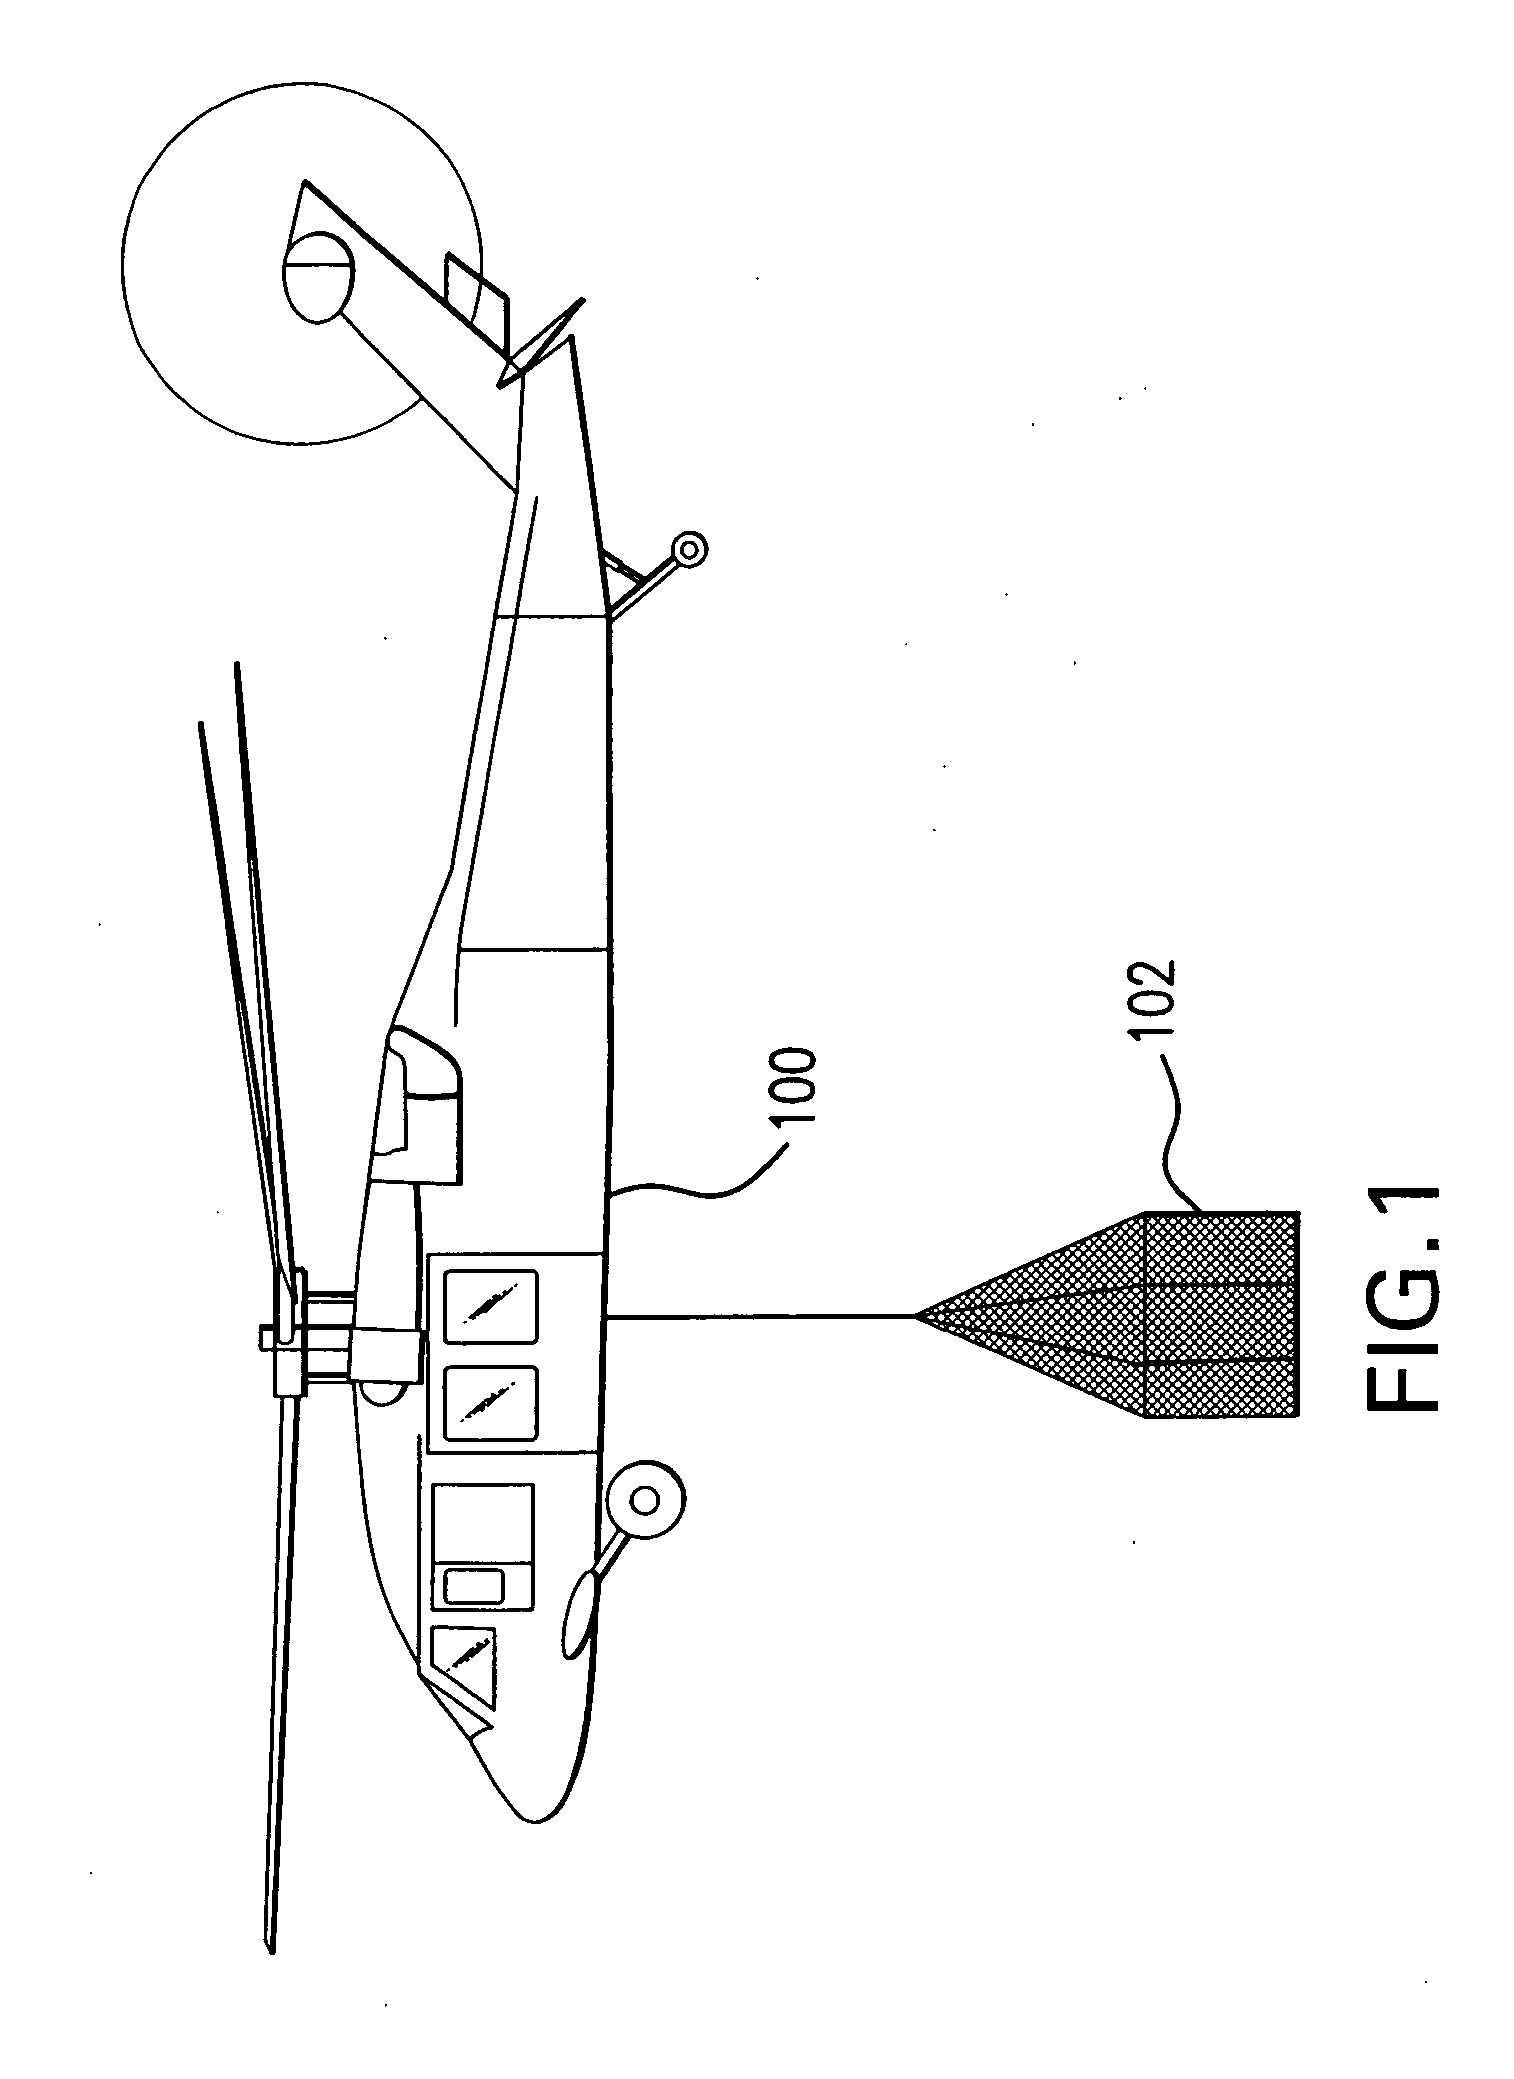 System and method for monitoring aircraft engine health and determining engine power available, and applications thereof